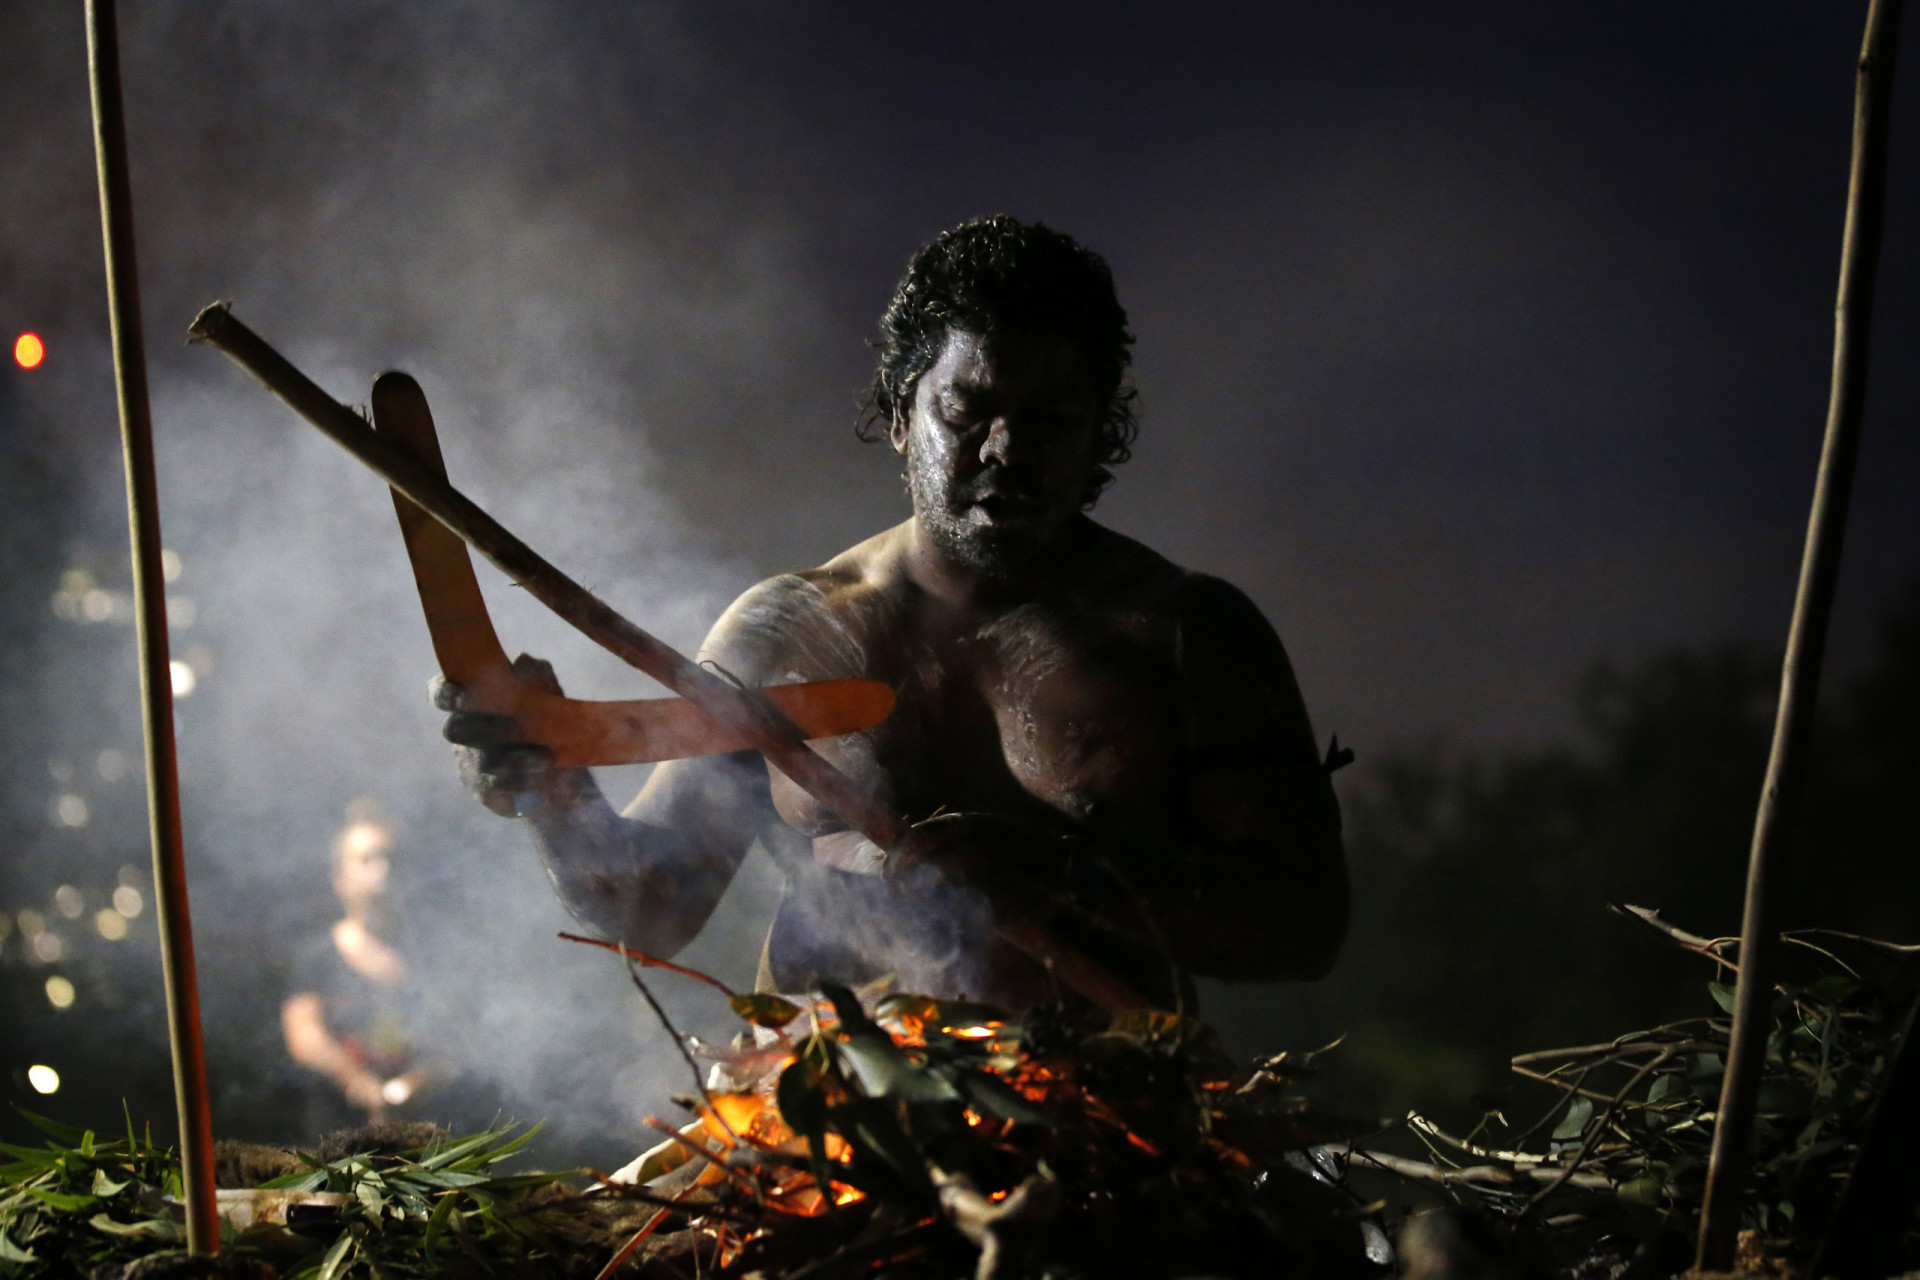 <p>Aboriginal and Torres Strait Islander people use smoke ceremonies to cleanse people and areas of bad spirits.</p><p>You may also like:<a href="https://www.starsinsider.com/n/369730?utm_source=msn.com&utm_medium=display&utm_campaign=referral_description&utm_content=722683en-us"> The world's fastest (and most expensive) police cars</a></p>